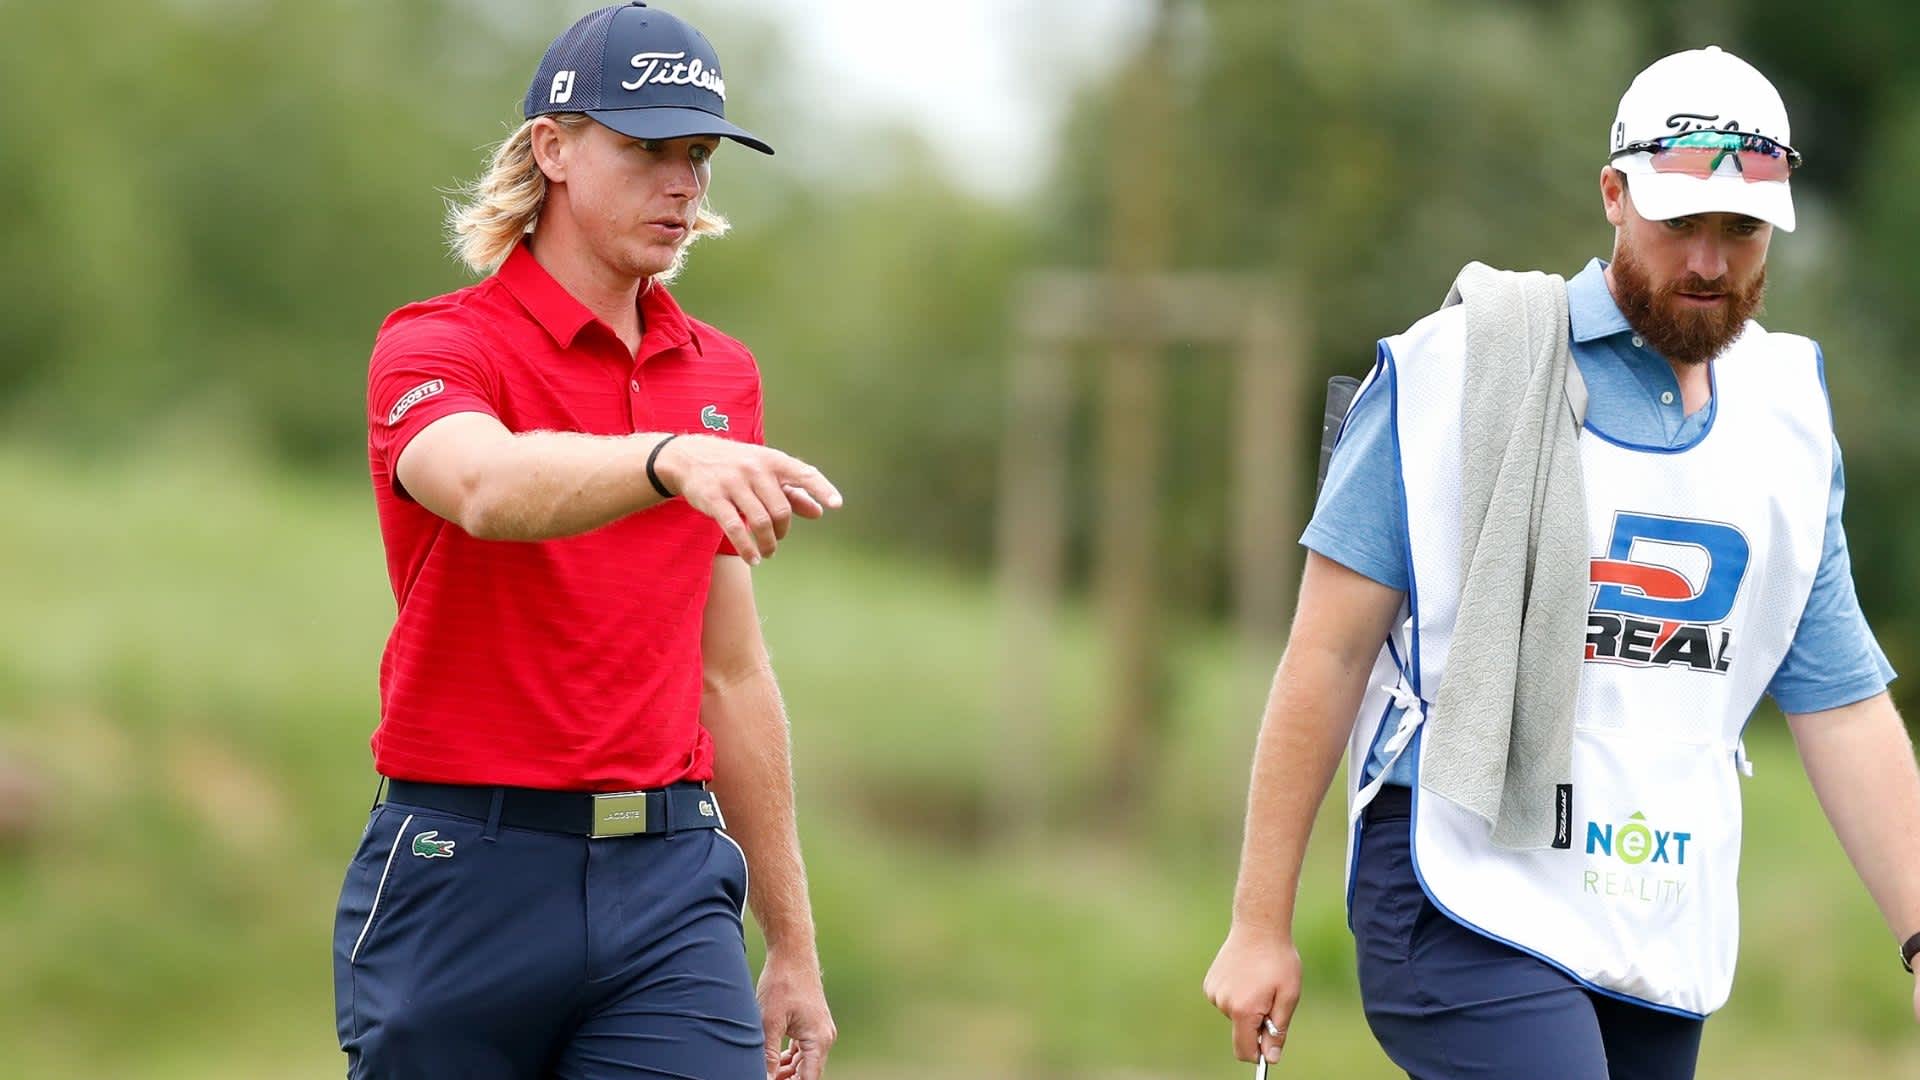 European Tour: Englishman Sam Horsfield posted 68 in opening round, sits 1 shot off the lead